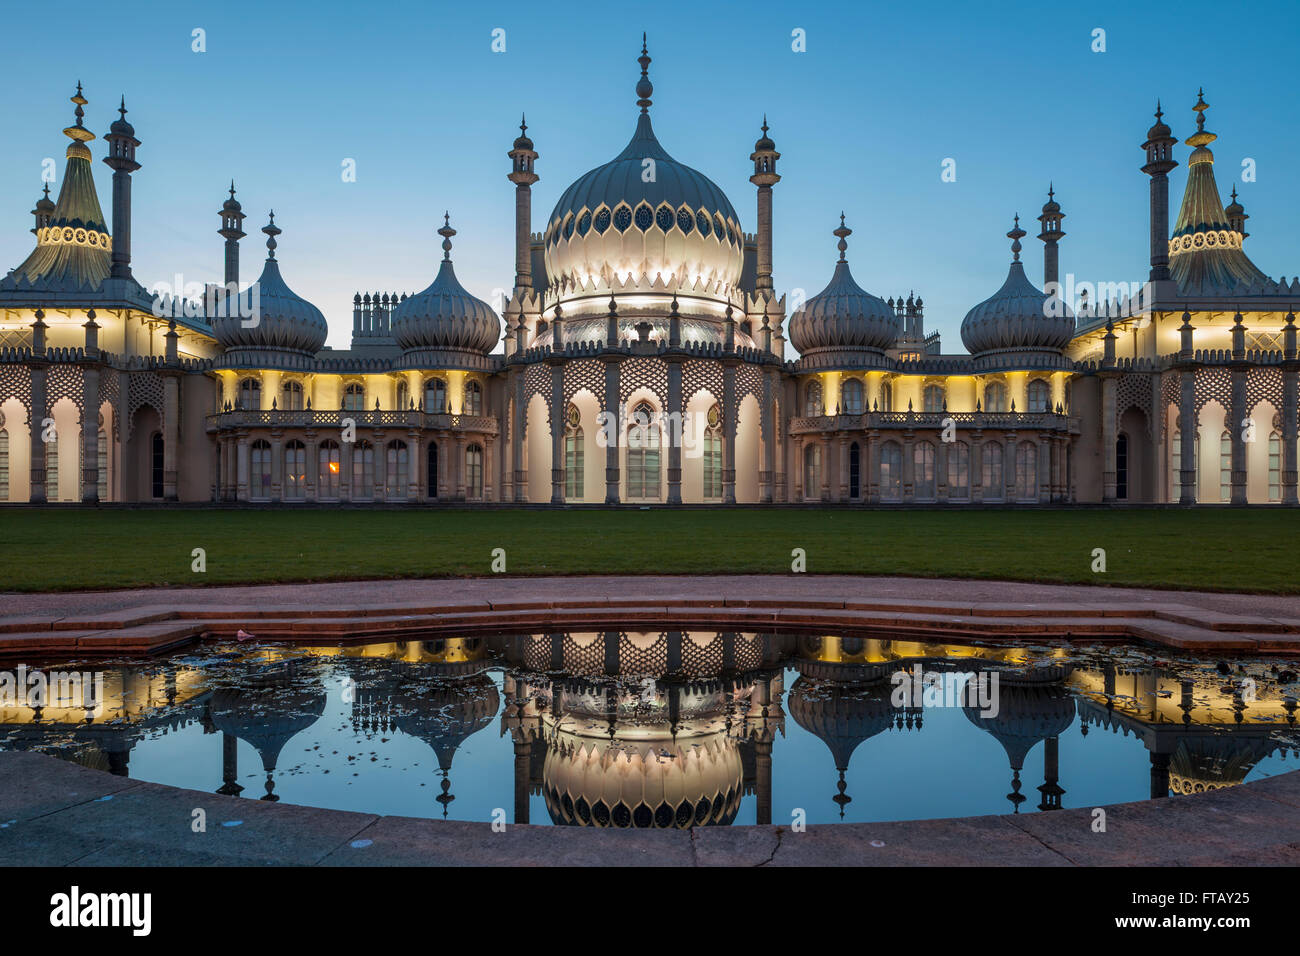 Abend im Royal Pavilion in Brighton, East Sussex, England. Stockfoto